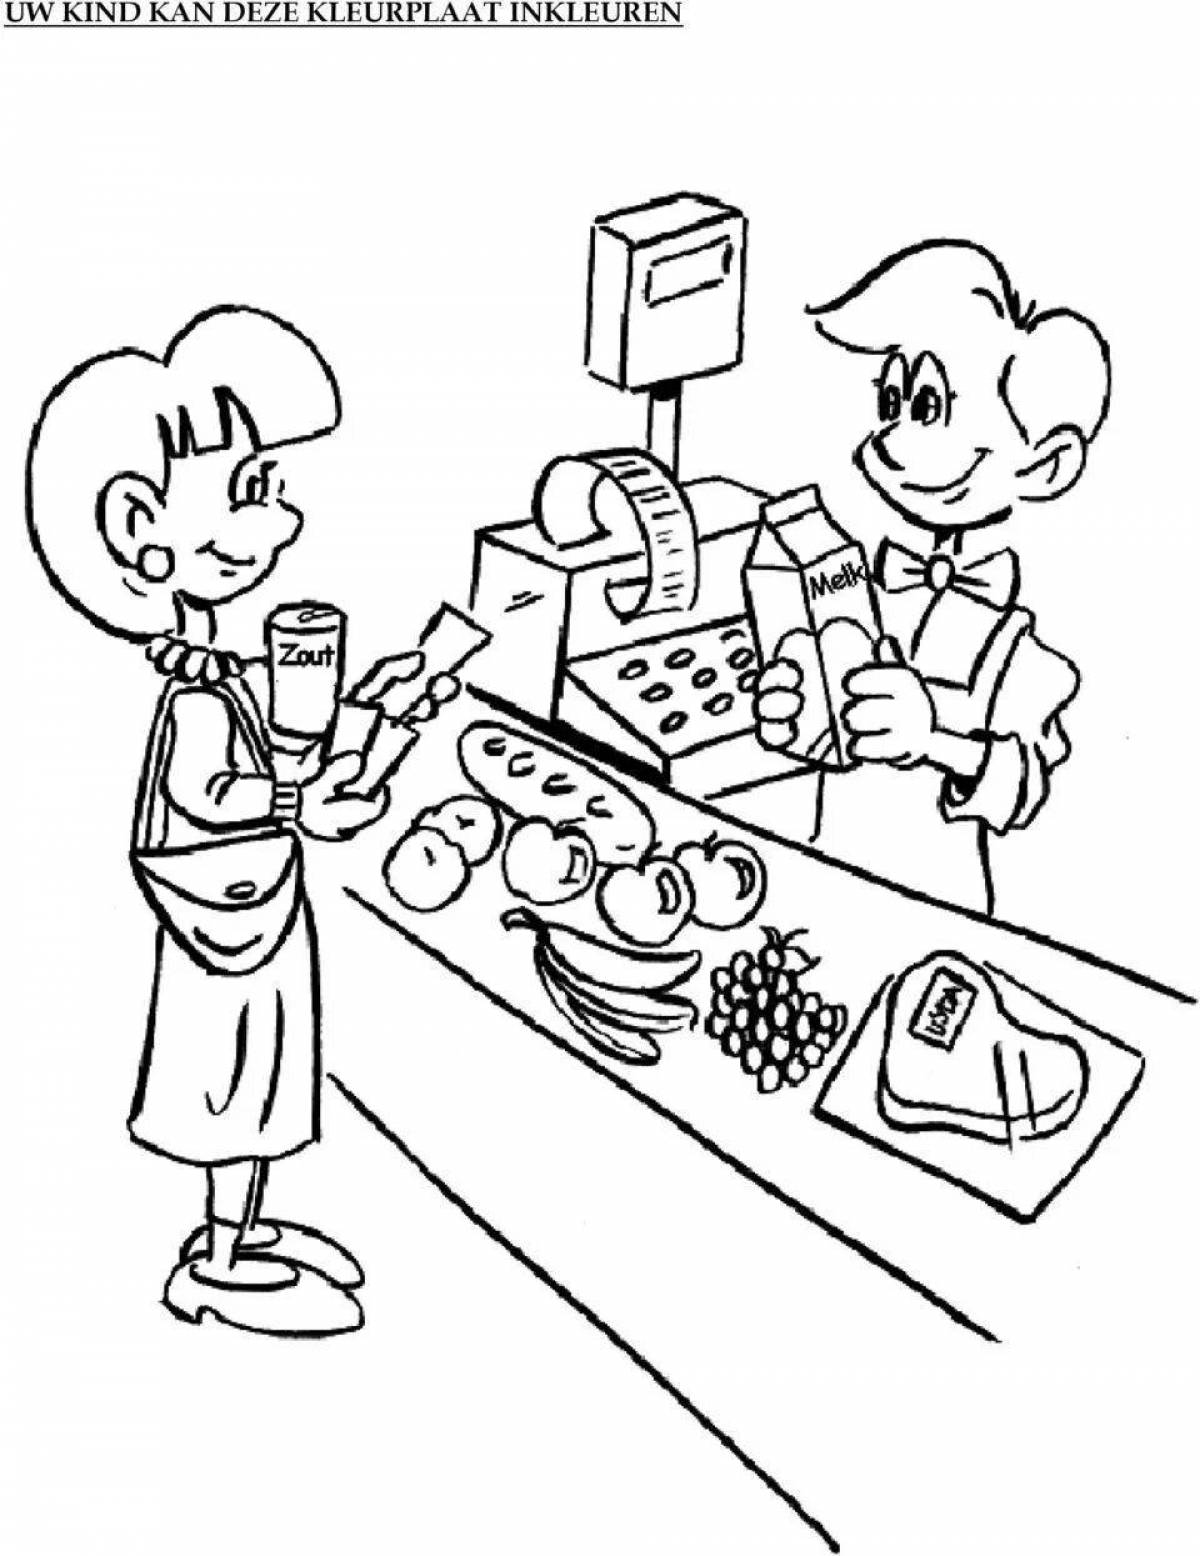 Coloring page encouraging financial literacy for preschoolers